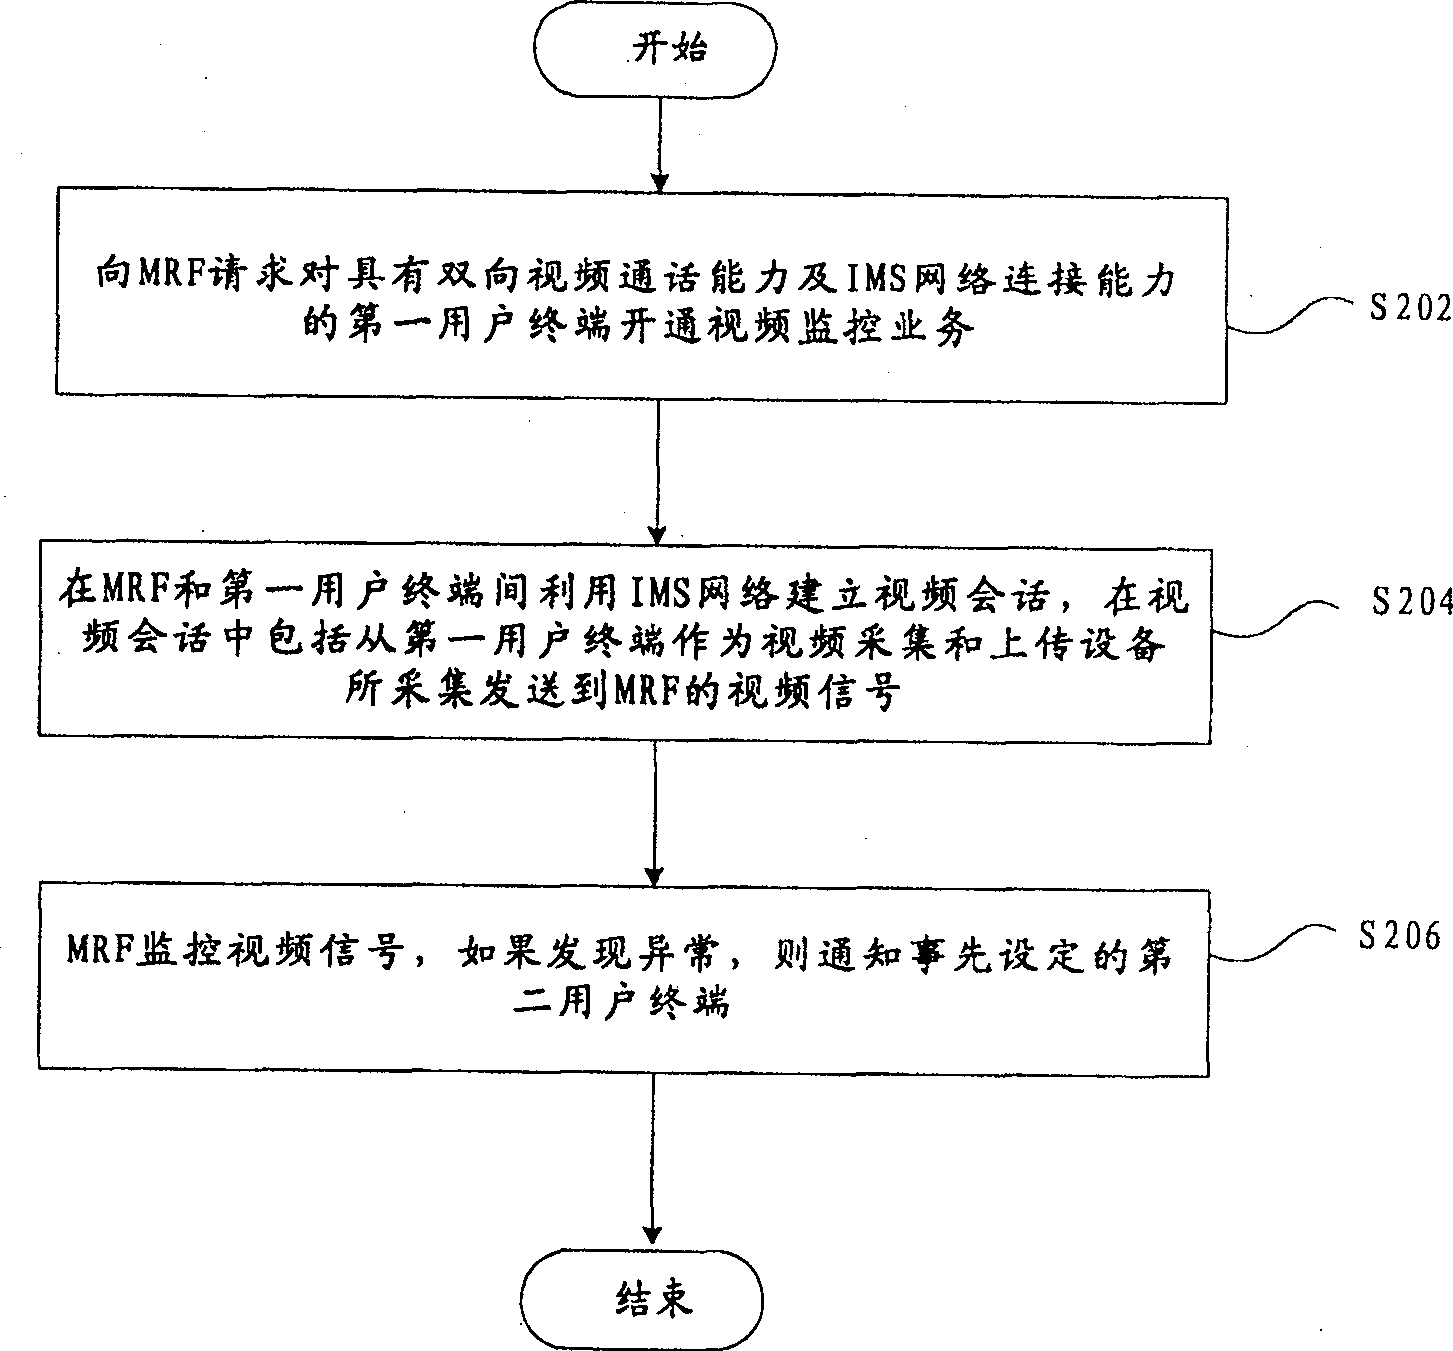 Video monitoring method and apparatus for on-demand application